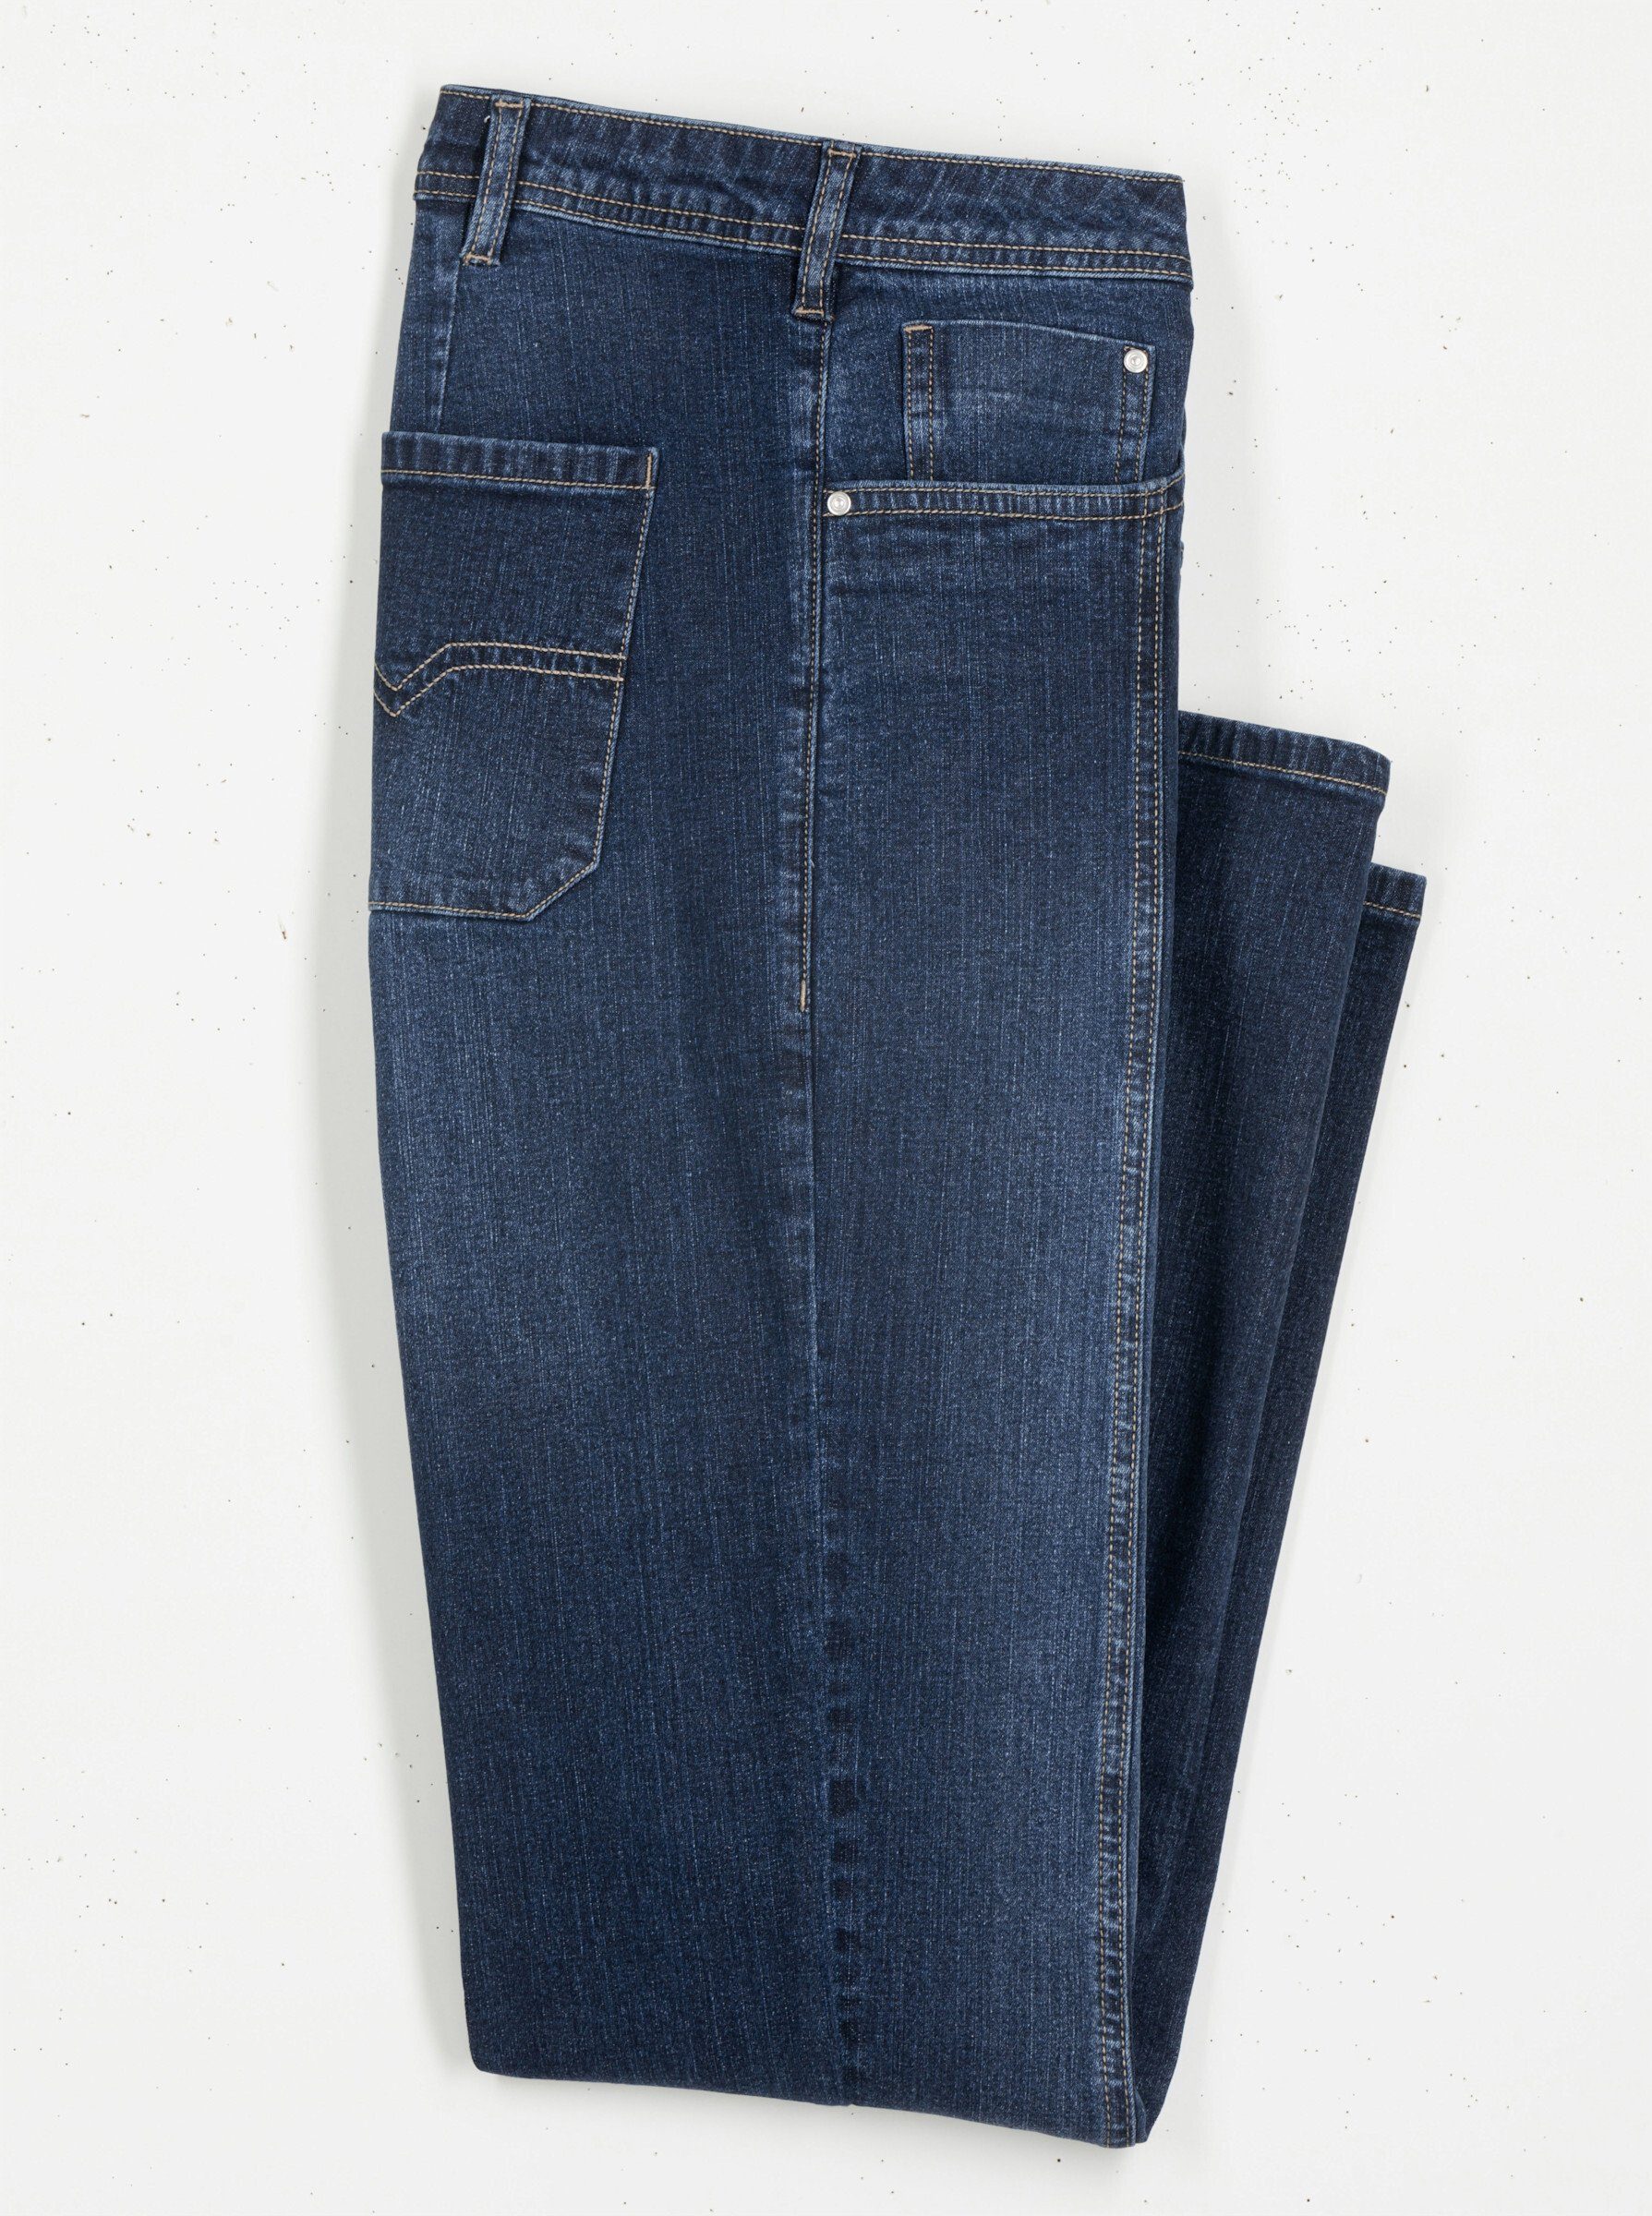 Jeans Bequeme an! blue-stone-washed Sieh